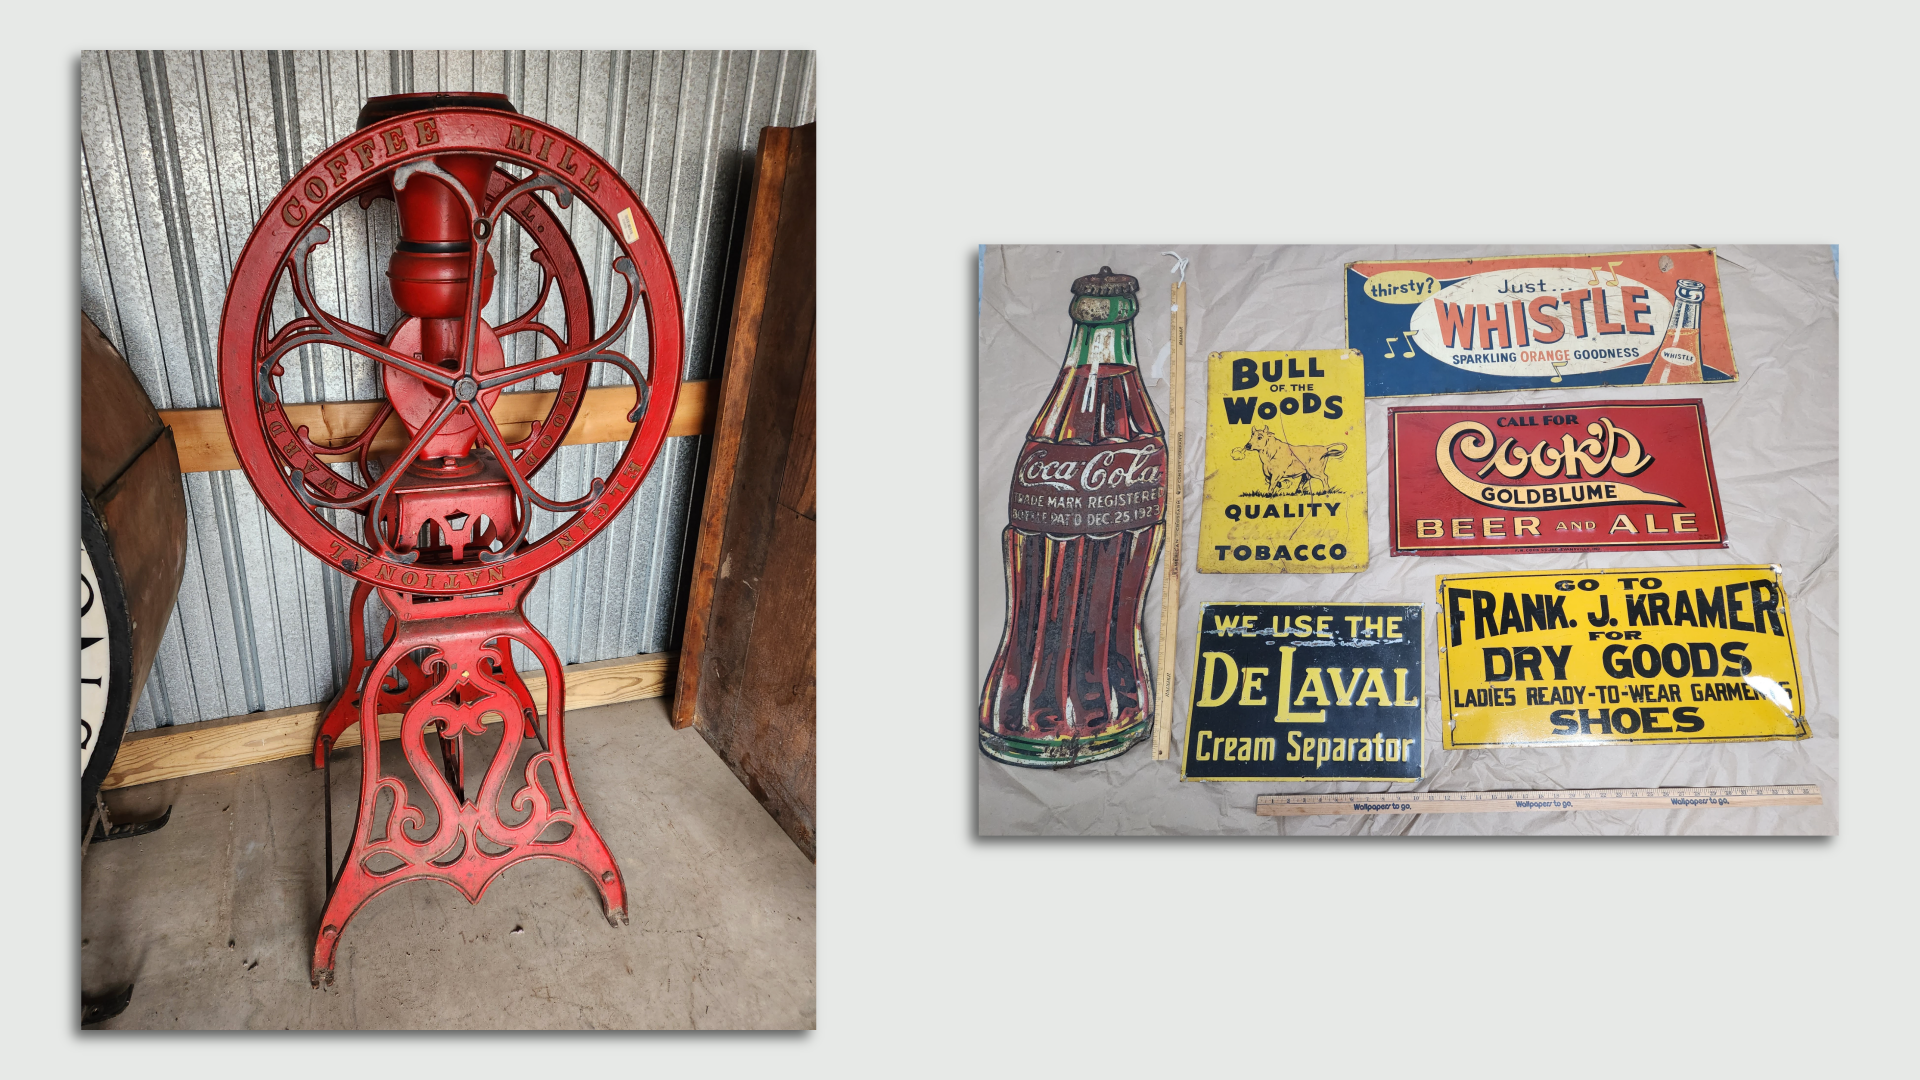 Photos of an antique coffee grinder and a collection of vintage signs from the old Spaghetti Warehouse restaurant